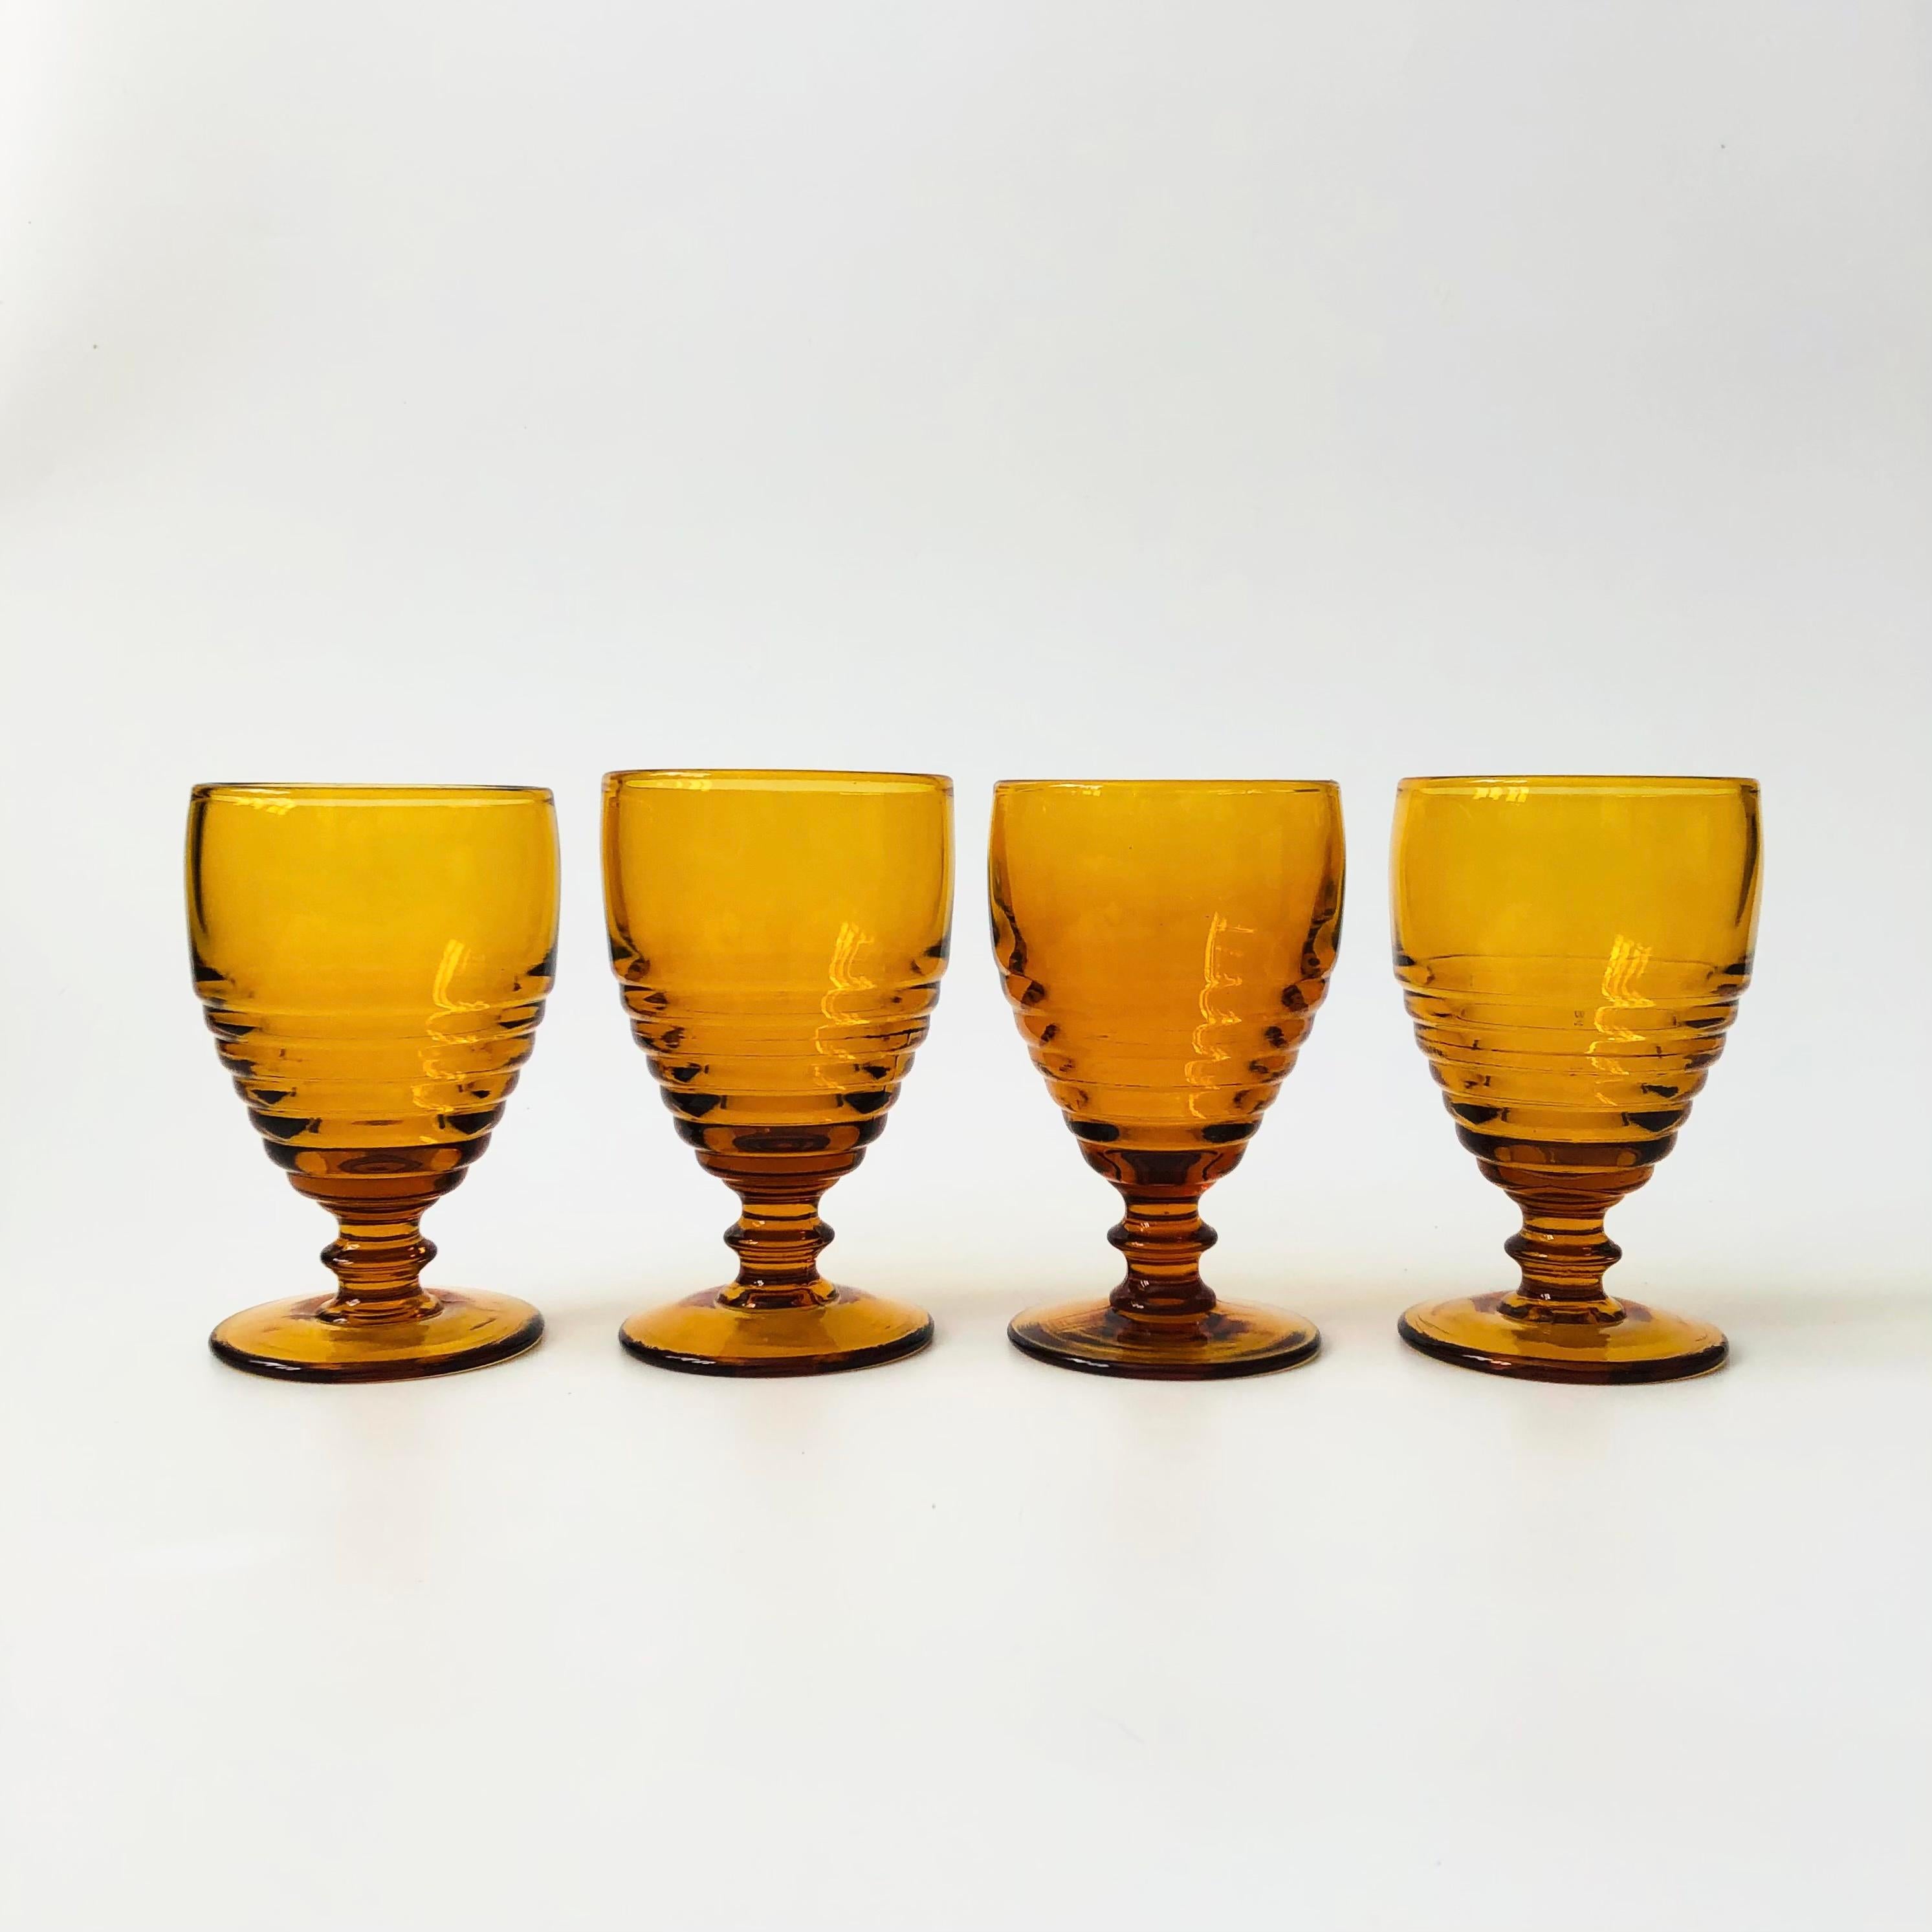 A set of 4 vintage depression glass wine goblets. Unique ribbed shape in a lovely amber color. Made in the 